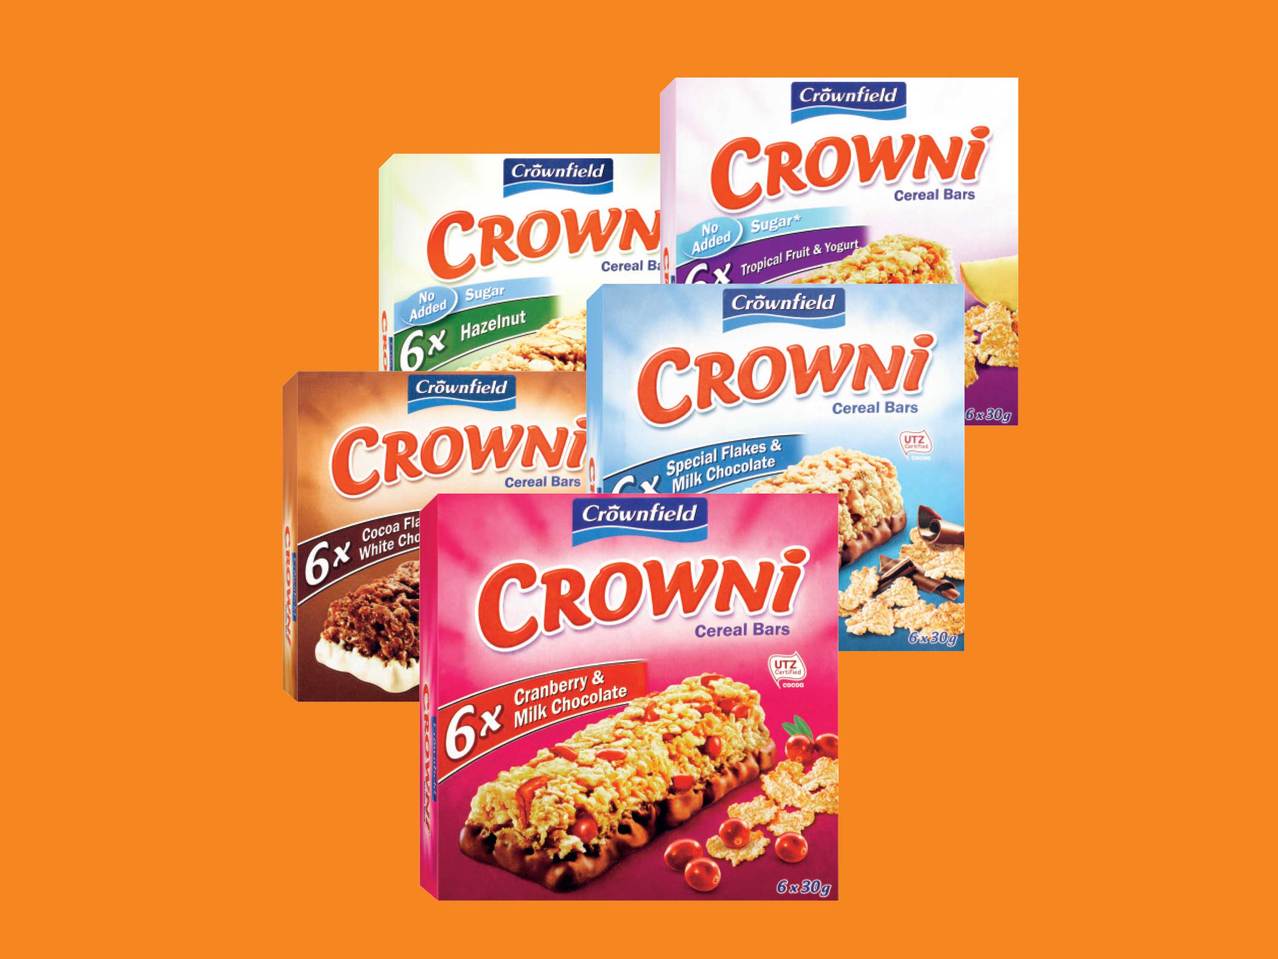 CROWNFIELD(R) Cereal Bars